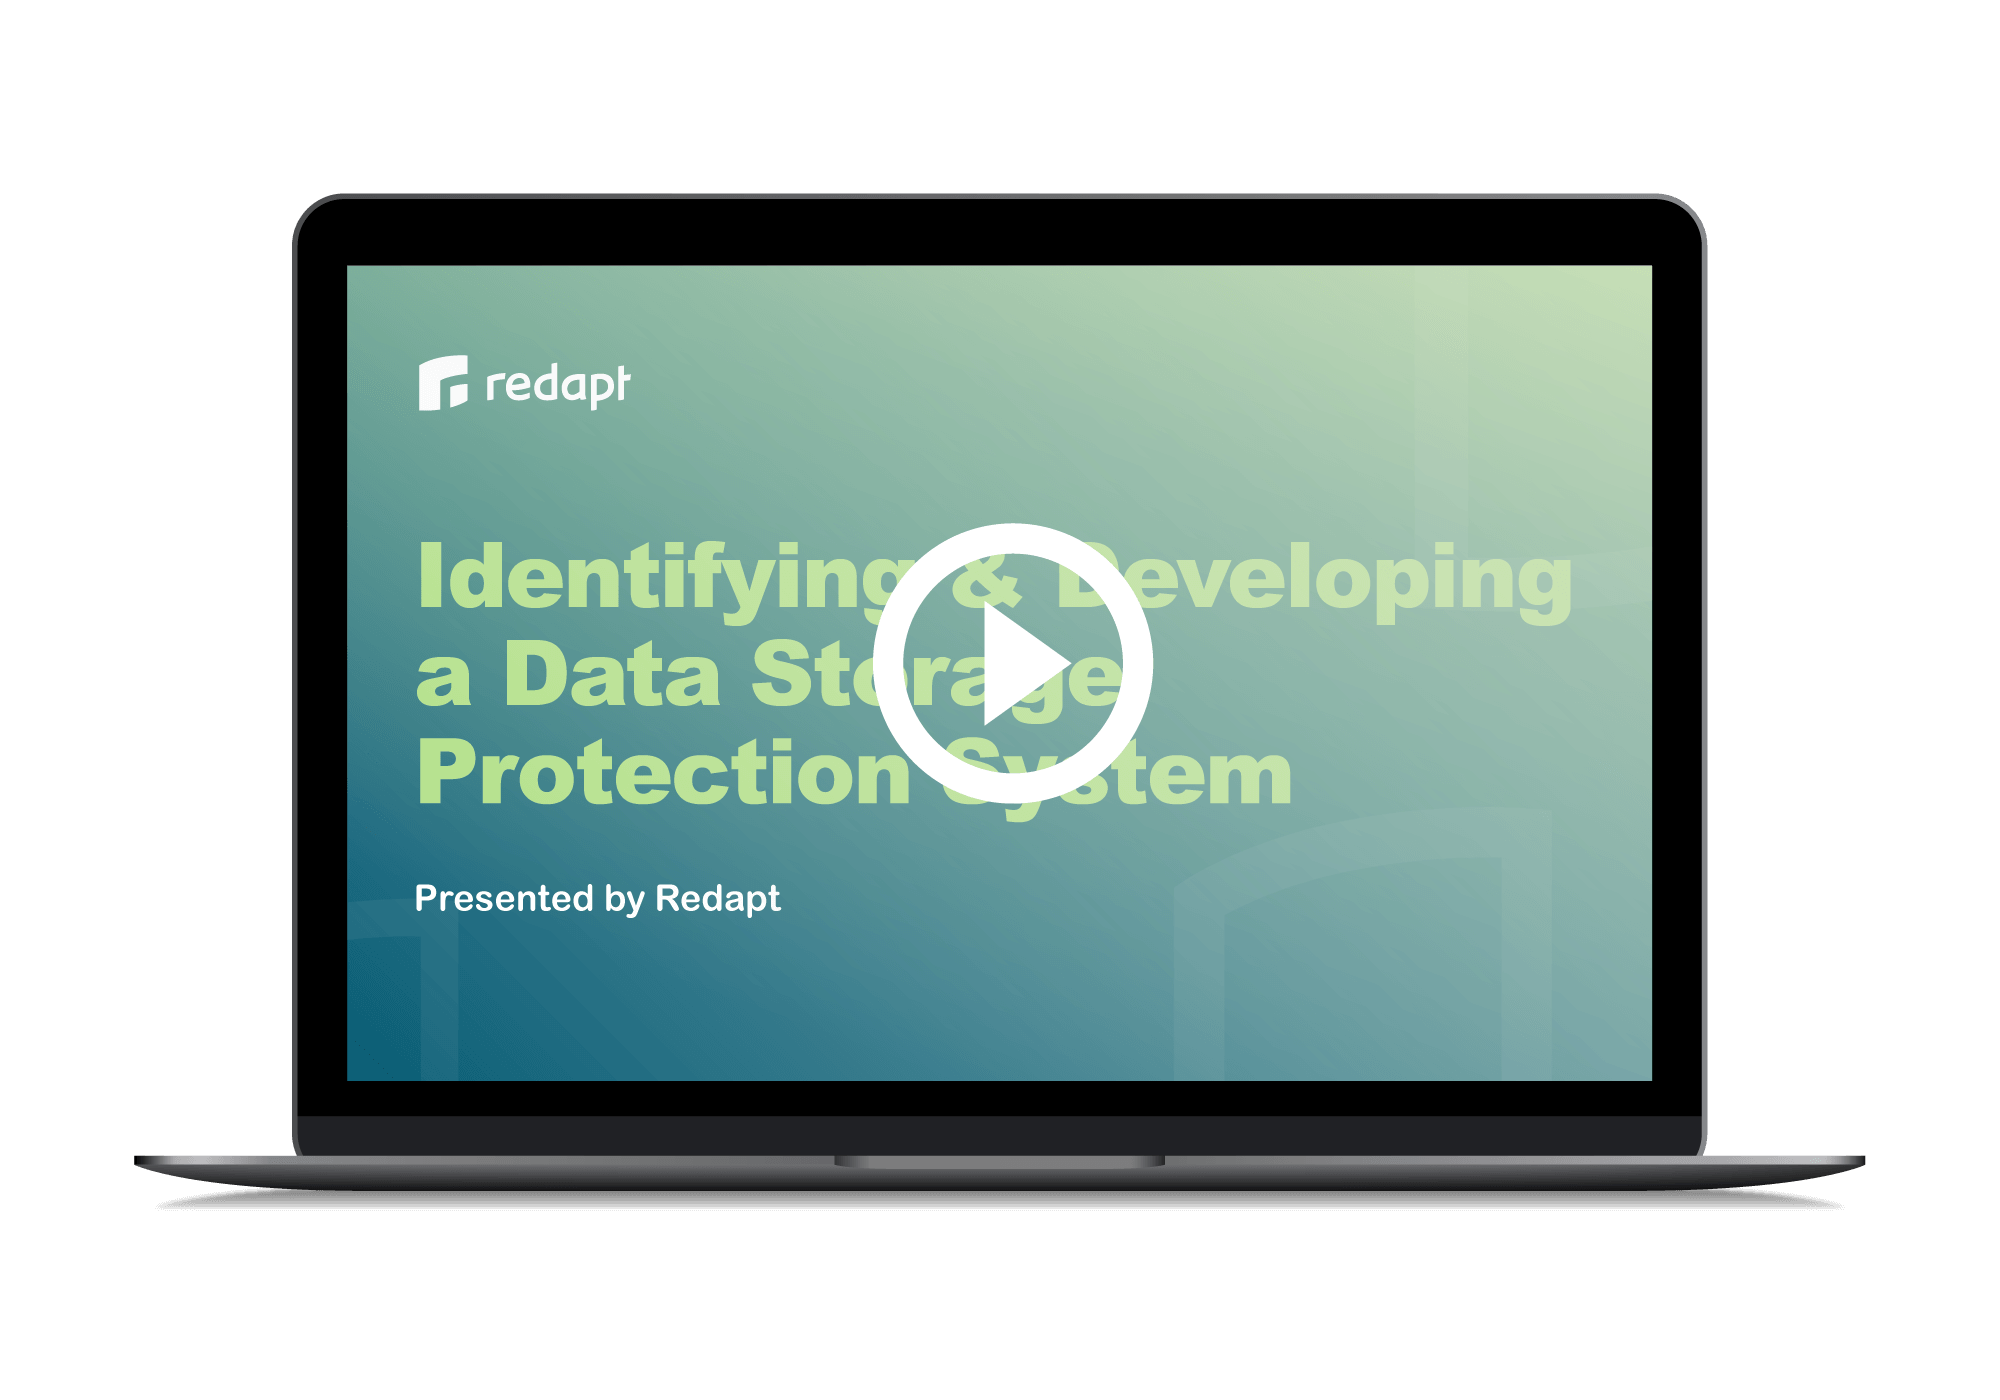 Watch the Webinar: Identifying & Developing a Data Storage Protection System